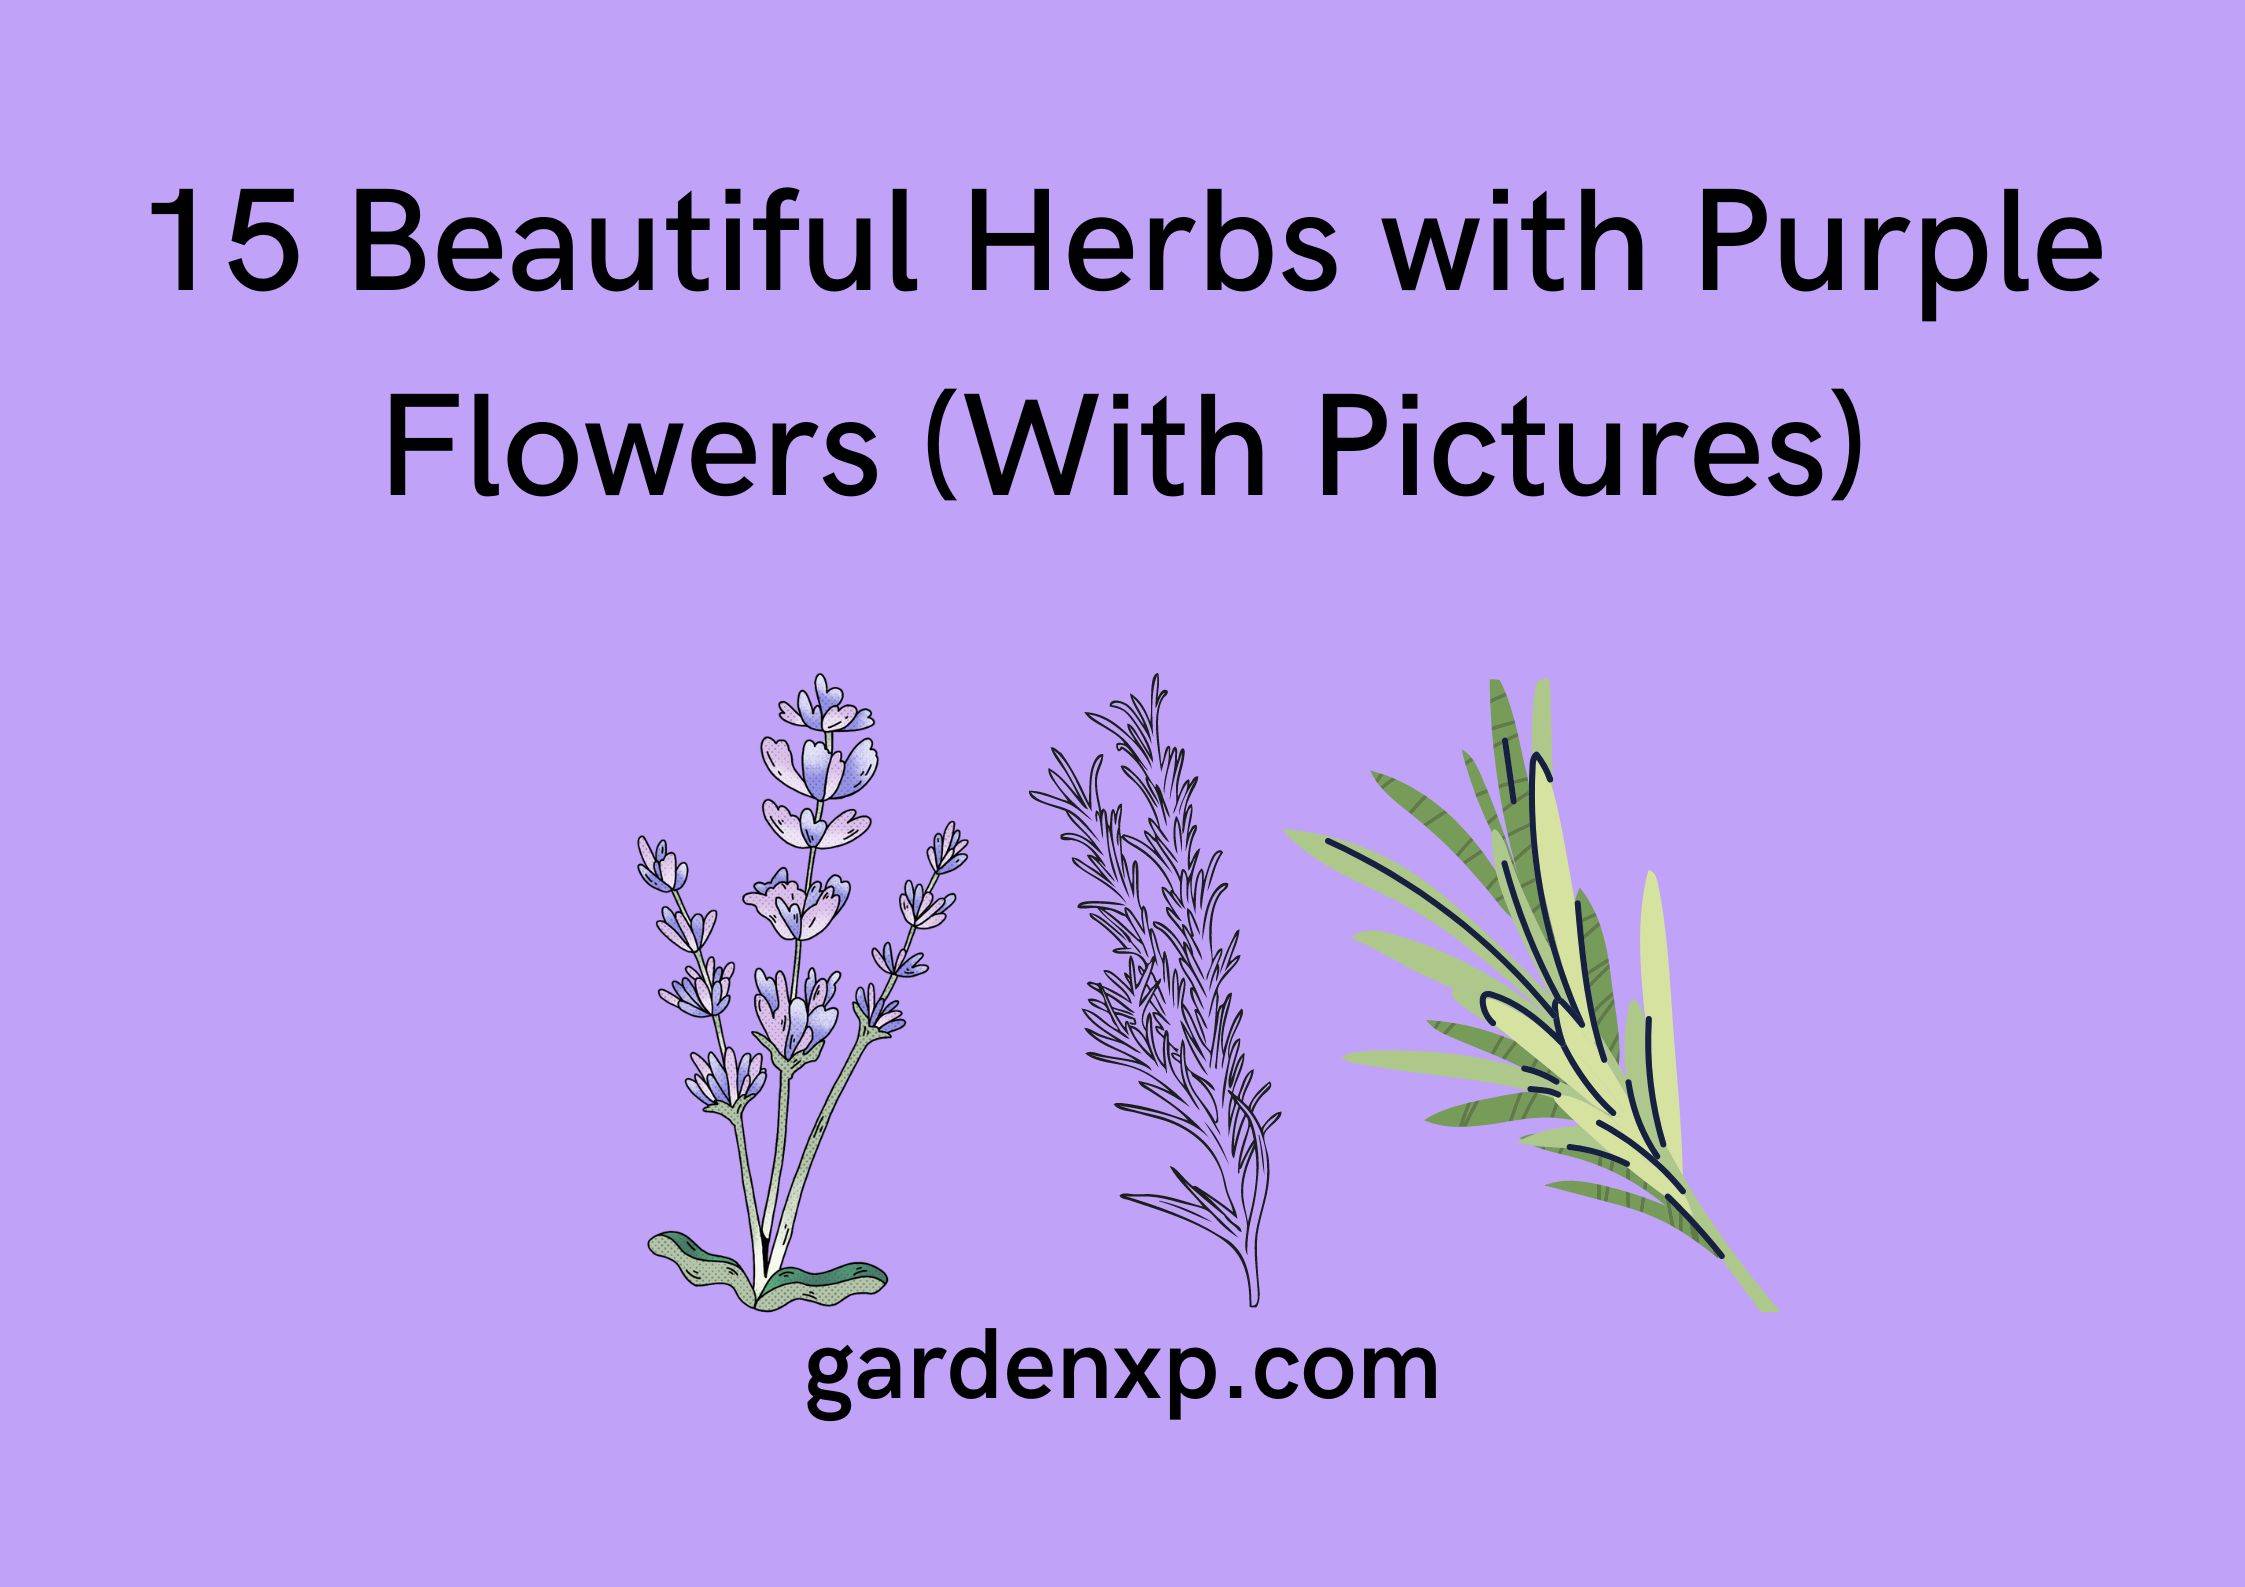 15 Beautiful Herbs with Purple Flowers (With Pictures)